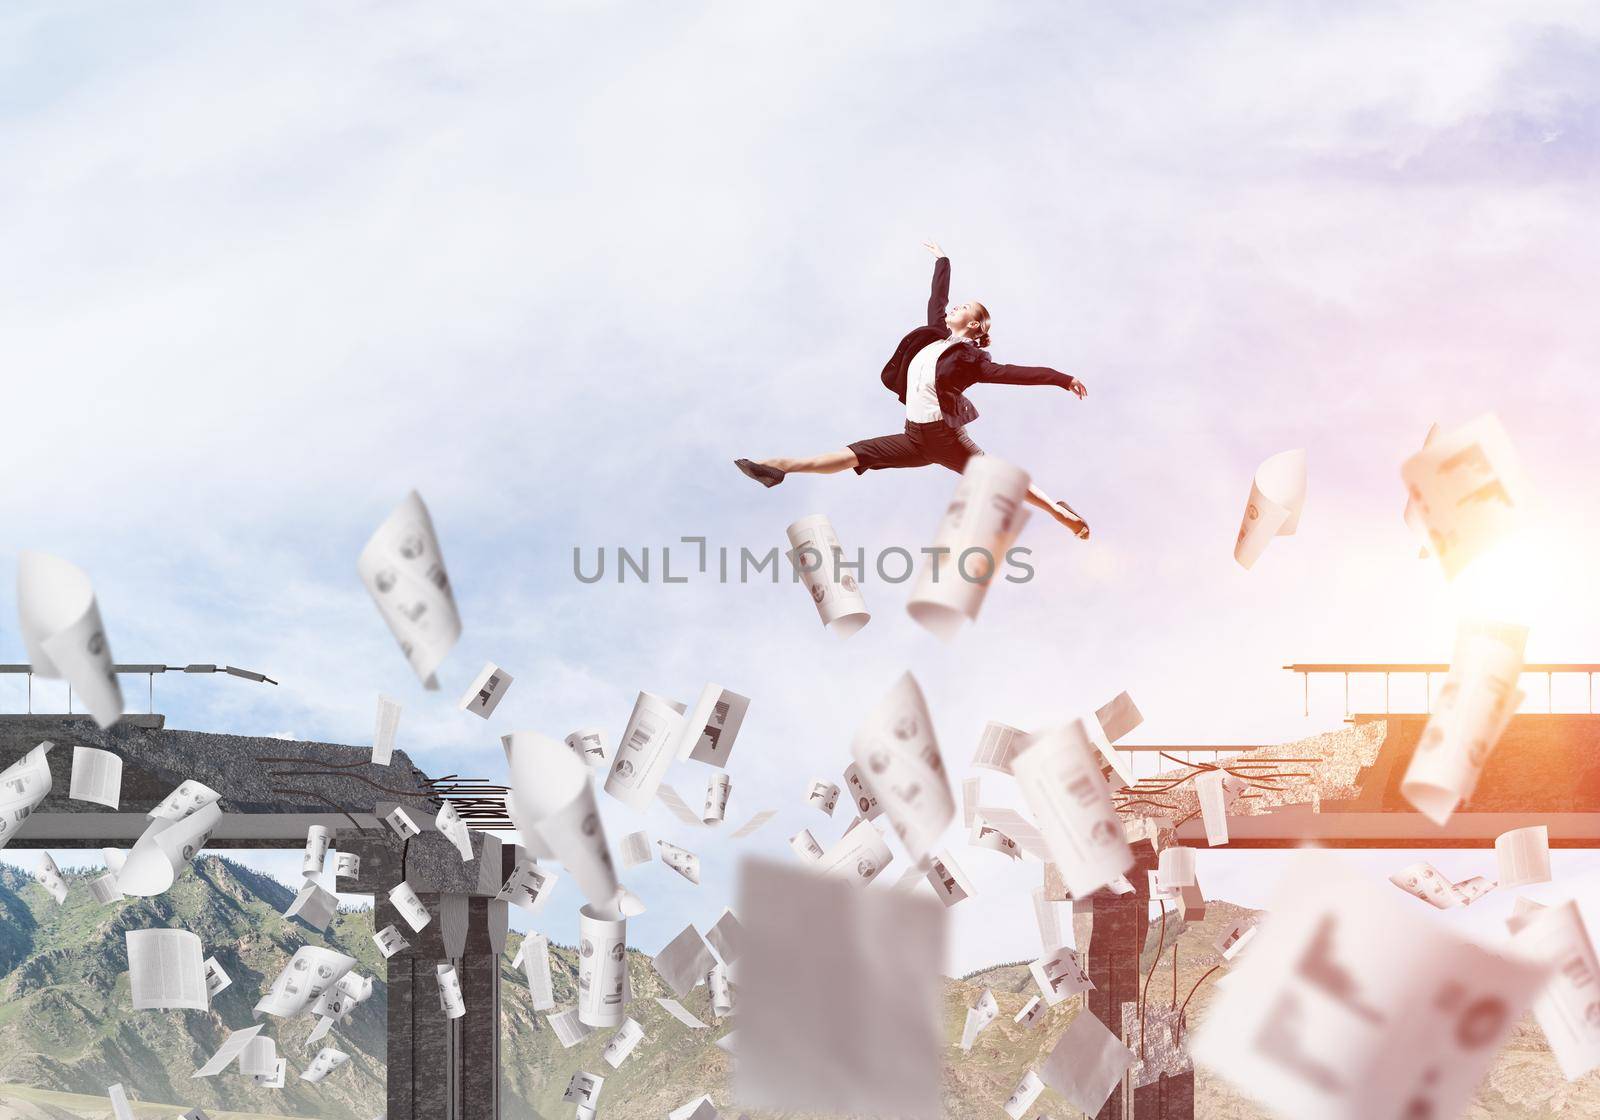 Business woman jumping over gap in bridge among flying papers as symbol of overcoming challenges. Skyscape with sunlight and nature view on background. 3D rendering.